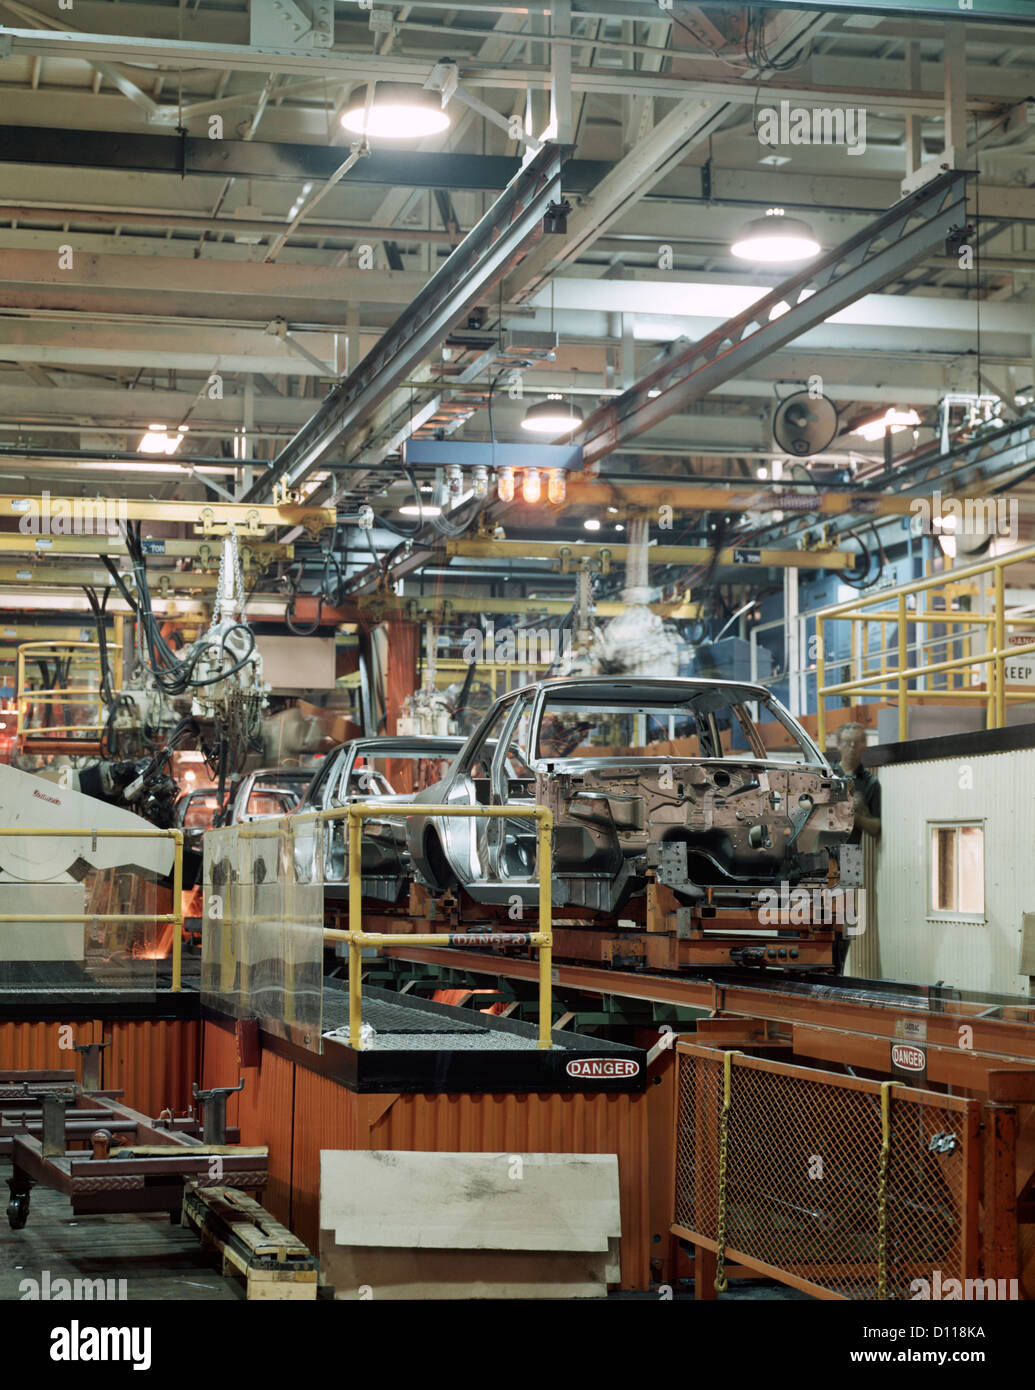 1970s AUTOMOBILE FACTORY CHRYSLER CAR ON ASSEMBLY LINE Stock Photo